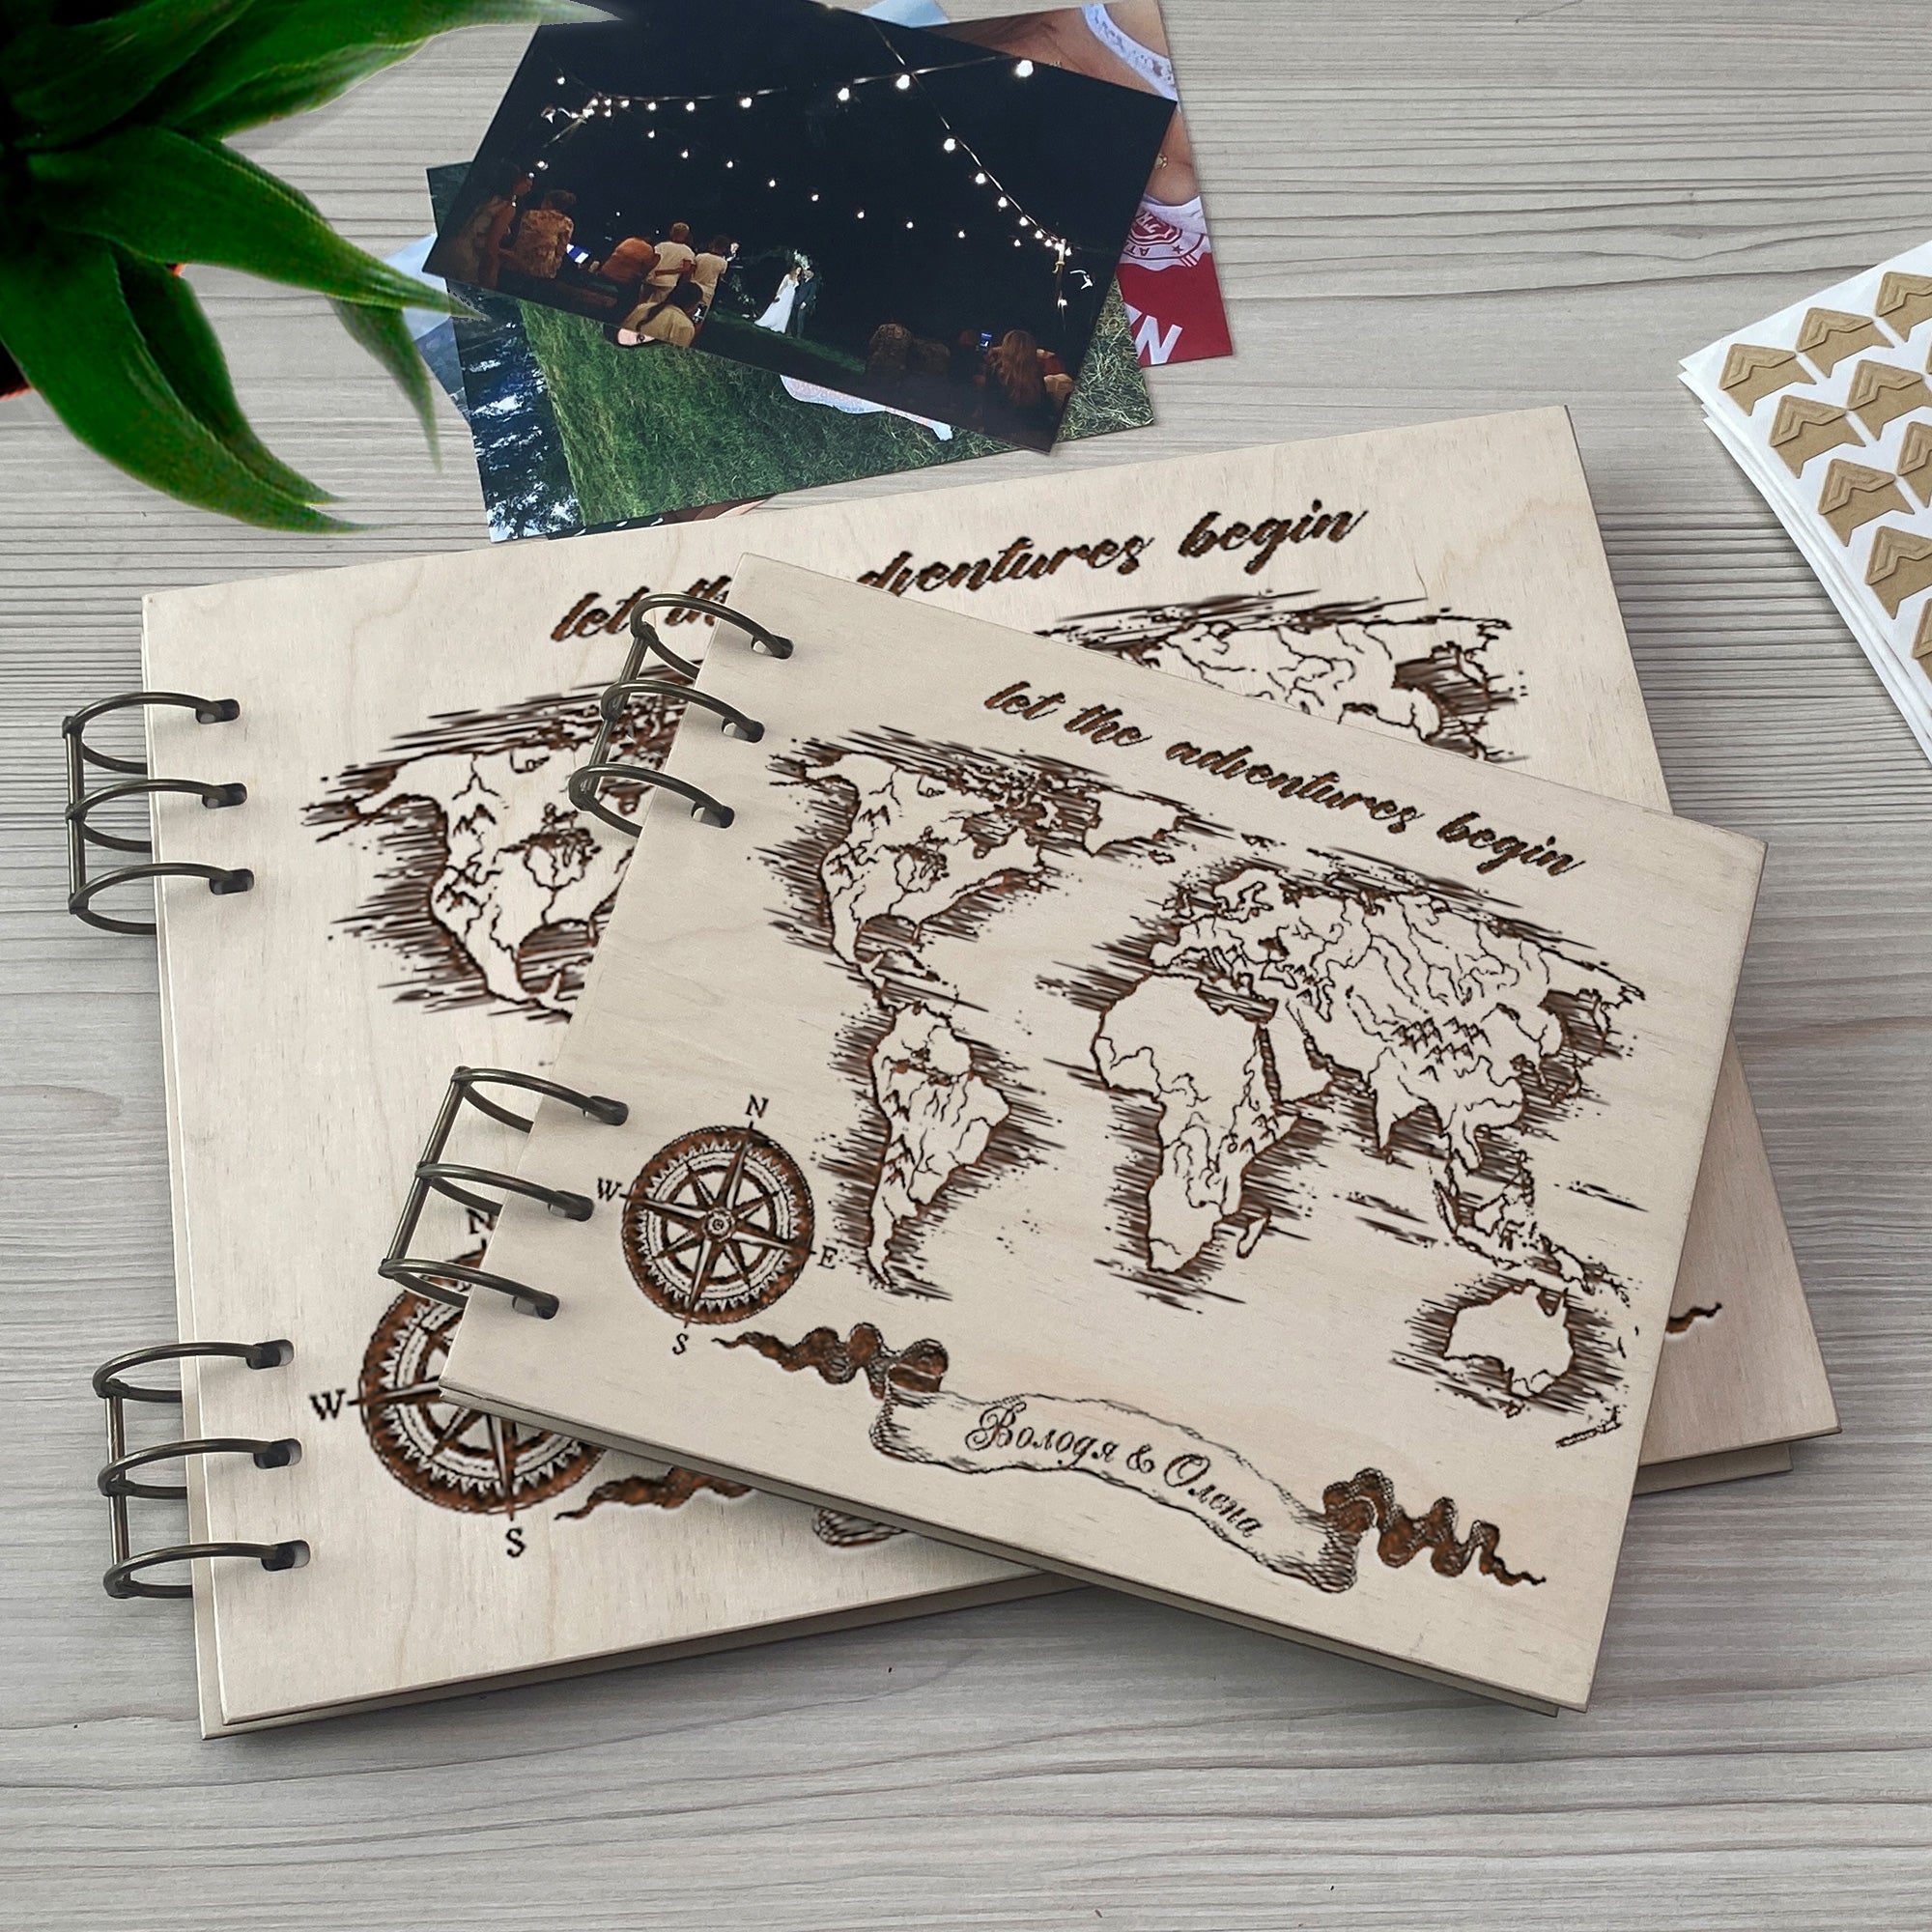 Personalized photo album cover and Map_mountain engraving